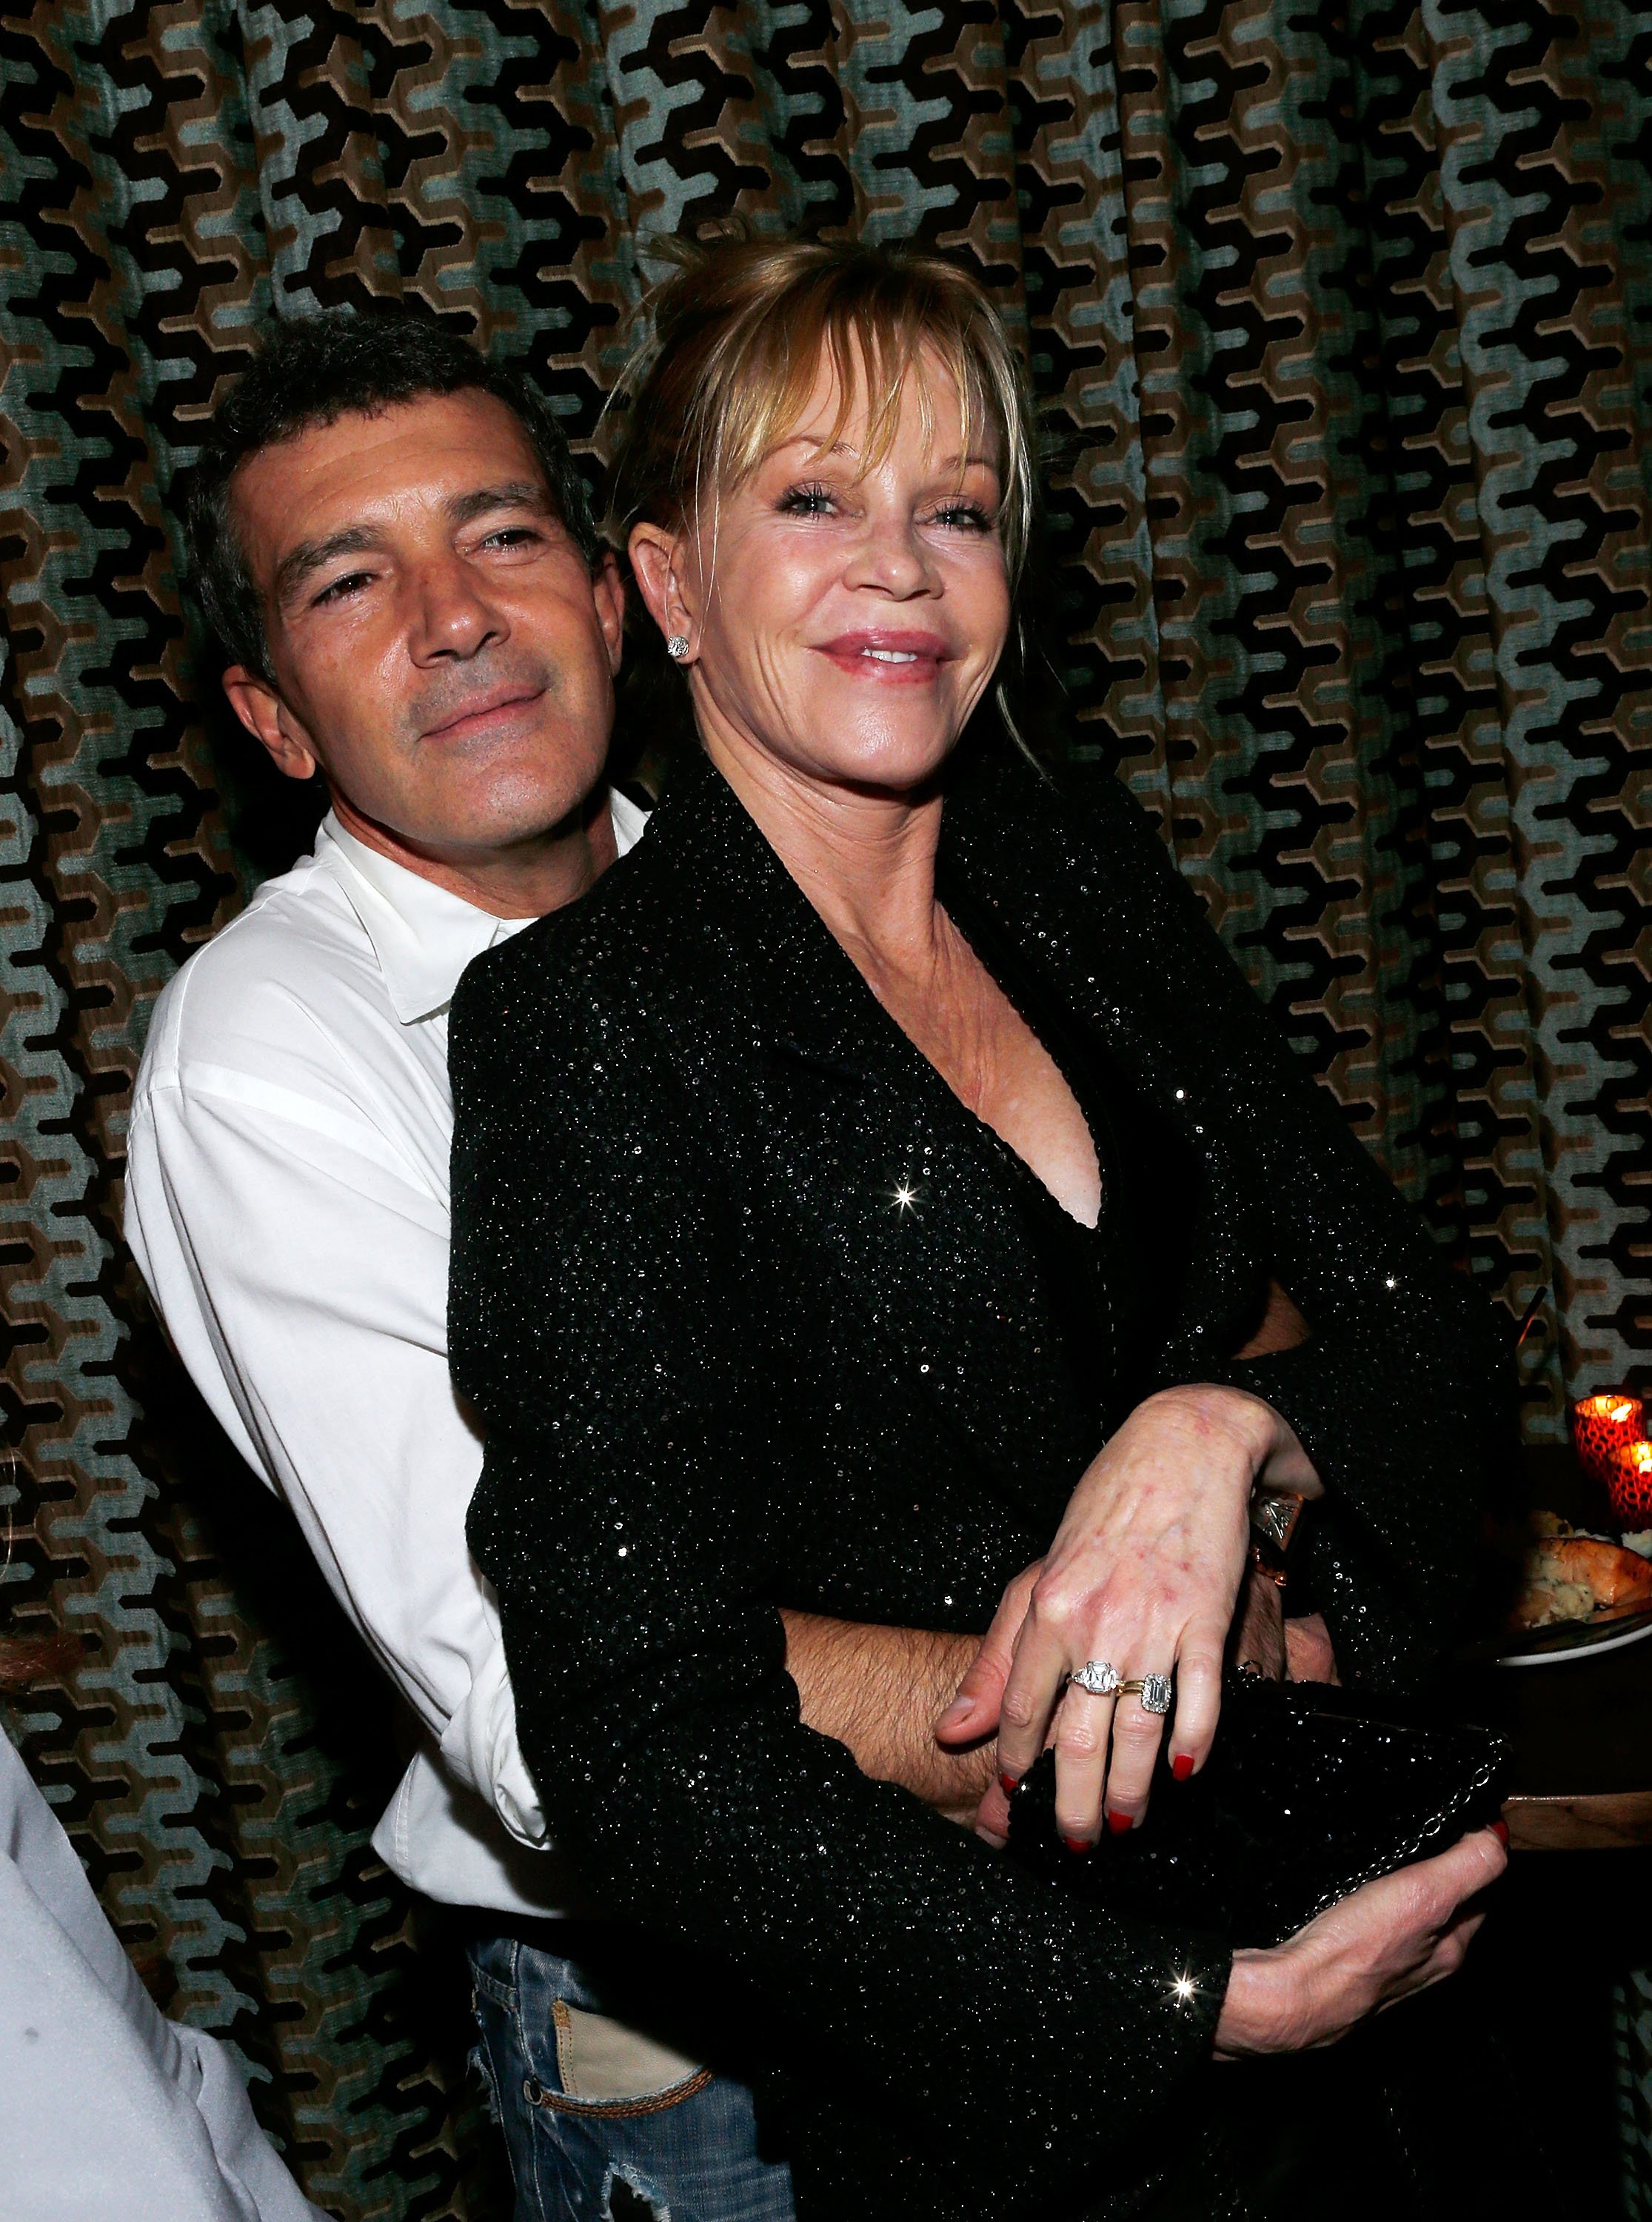 Antonio Banderas and actress Melanie Griffith attend the after party for the "Black Nativity" premiere at The Red Rooster on November 18, 2013 | Photo: Getty Images